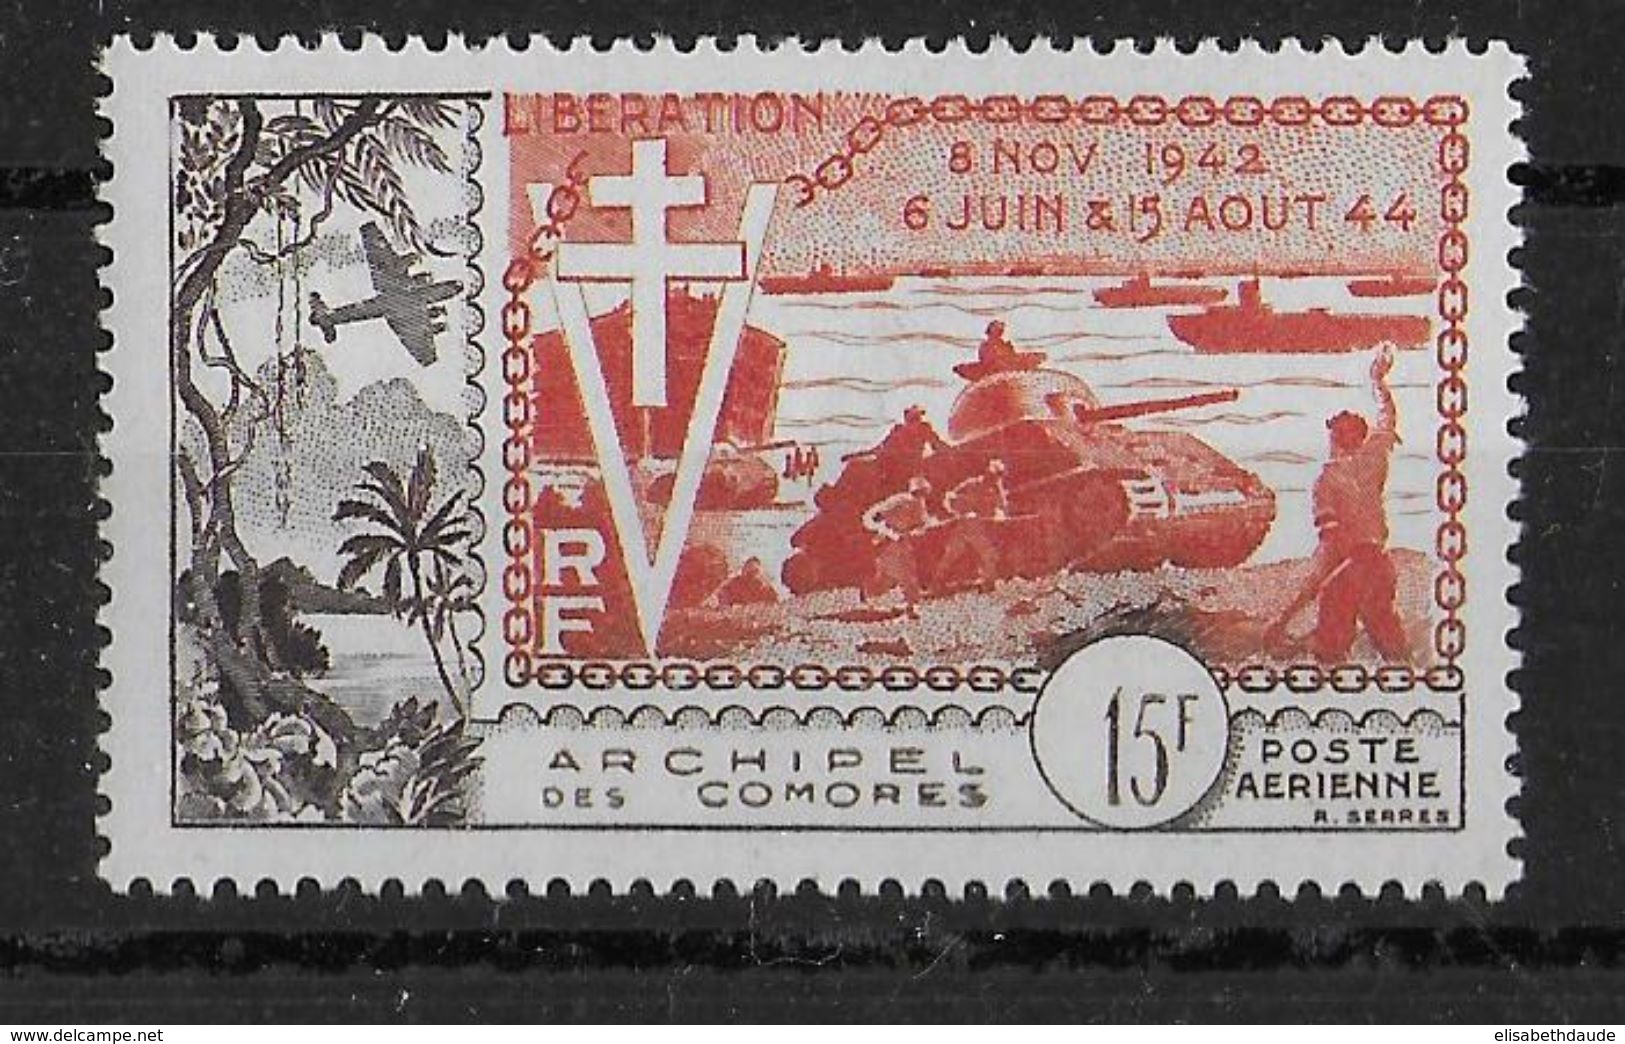 COMORES - 1954 - POSTE AERIENNE YT N°4 * MLH CHARNIERE TRES LEGERE - COTE = 45 EUR. - Unused Stamps